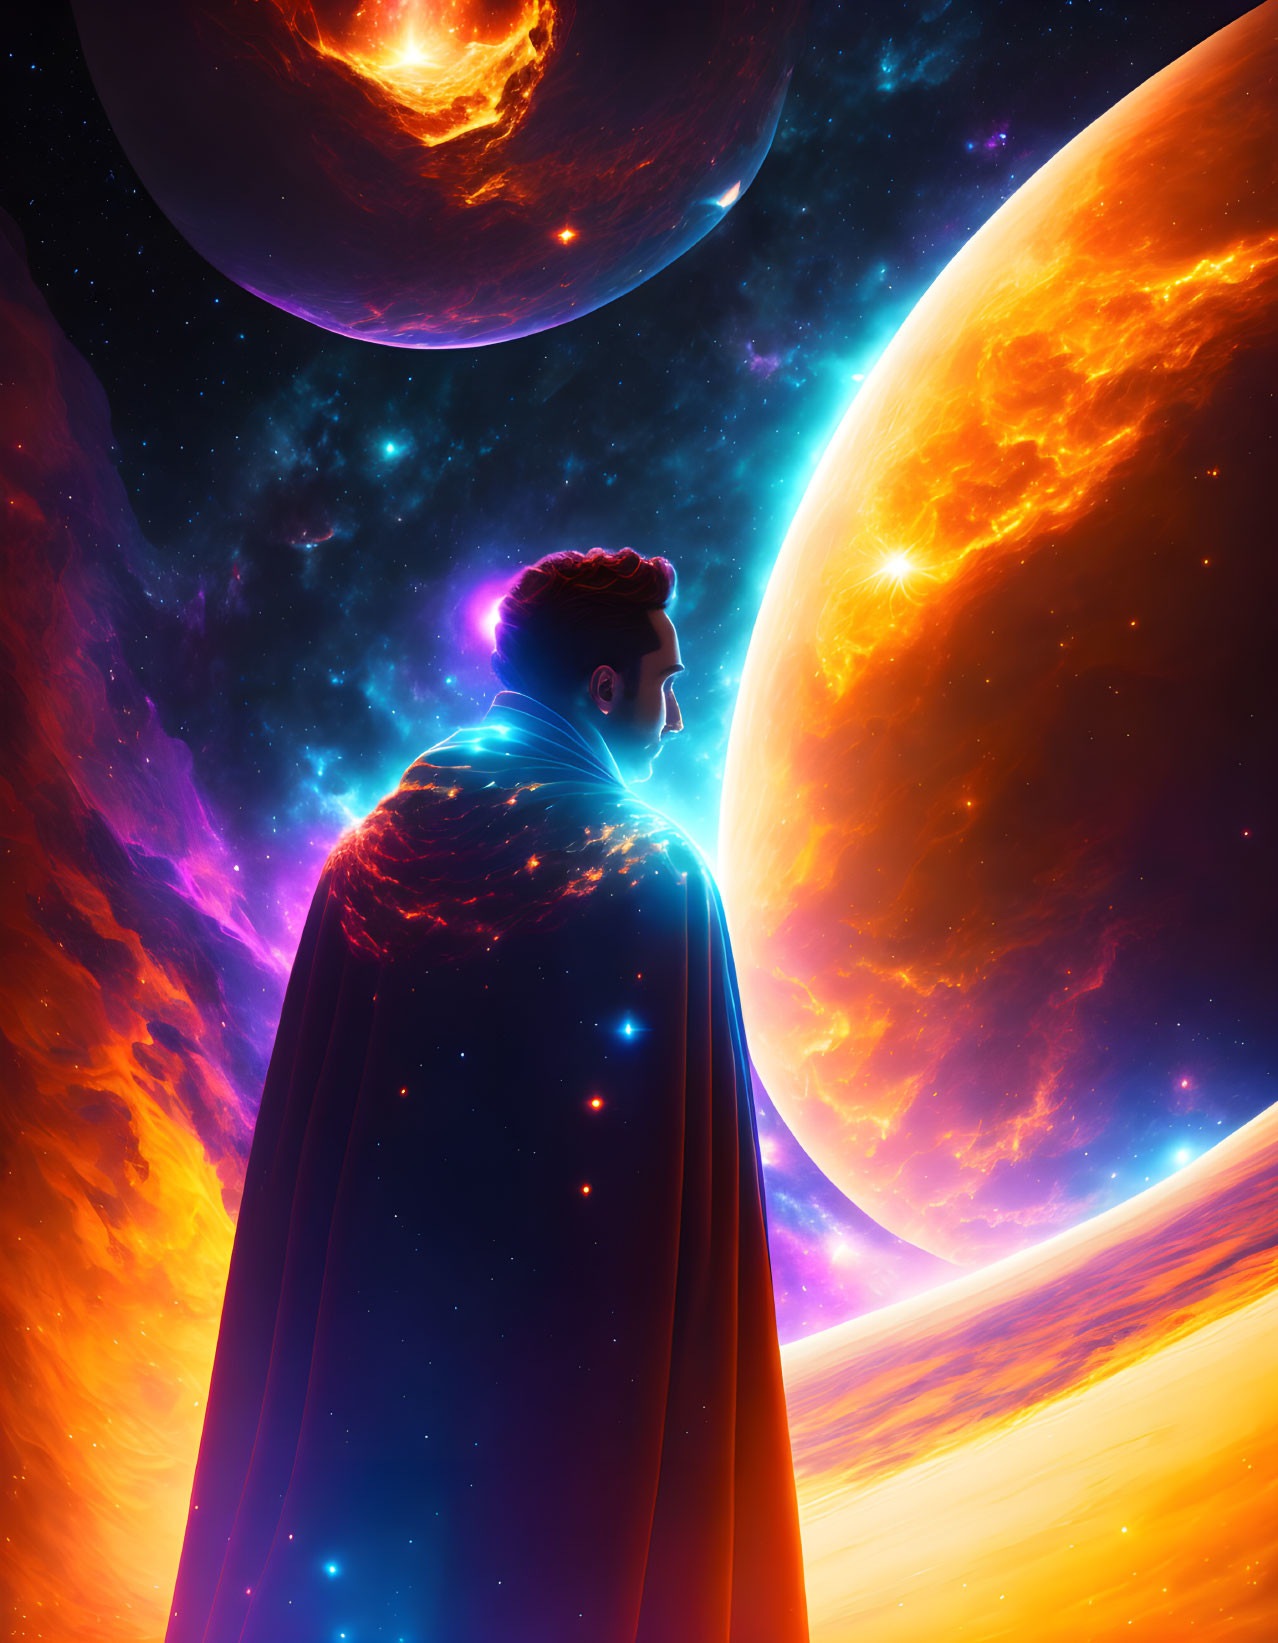 Person with Glowing Aura in Cosmic Scenery with Planets